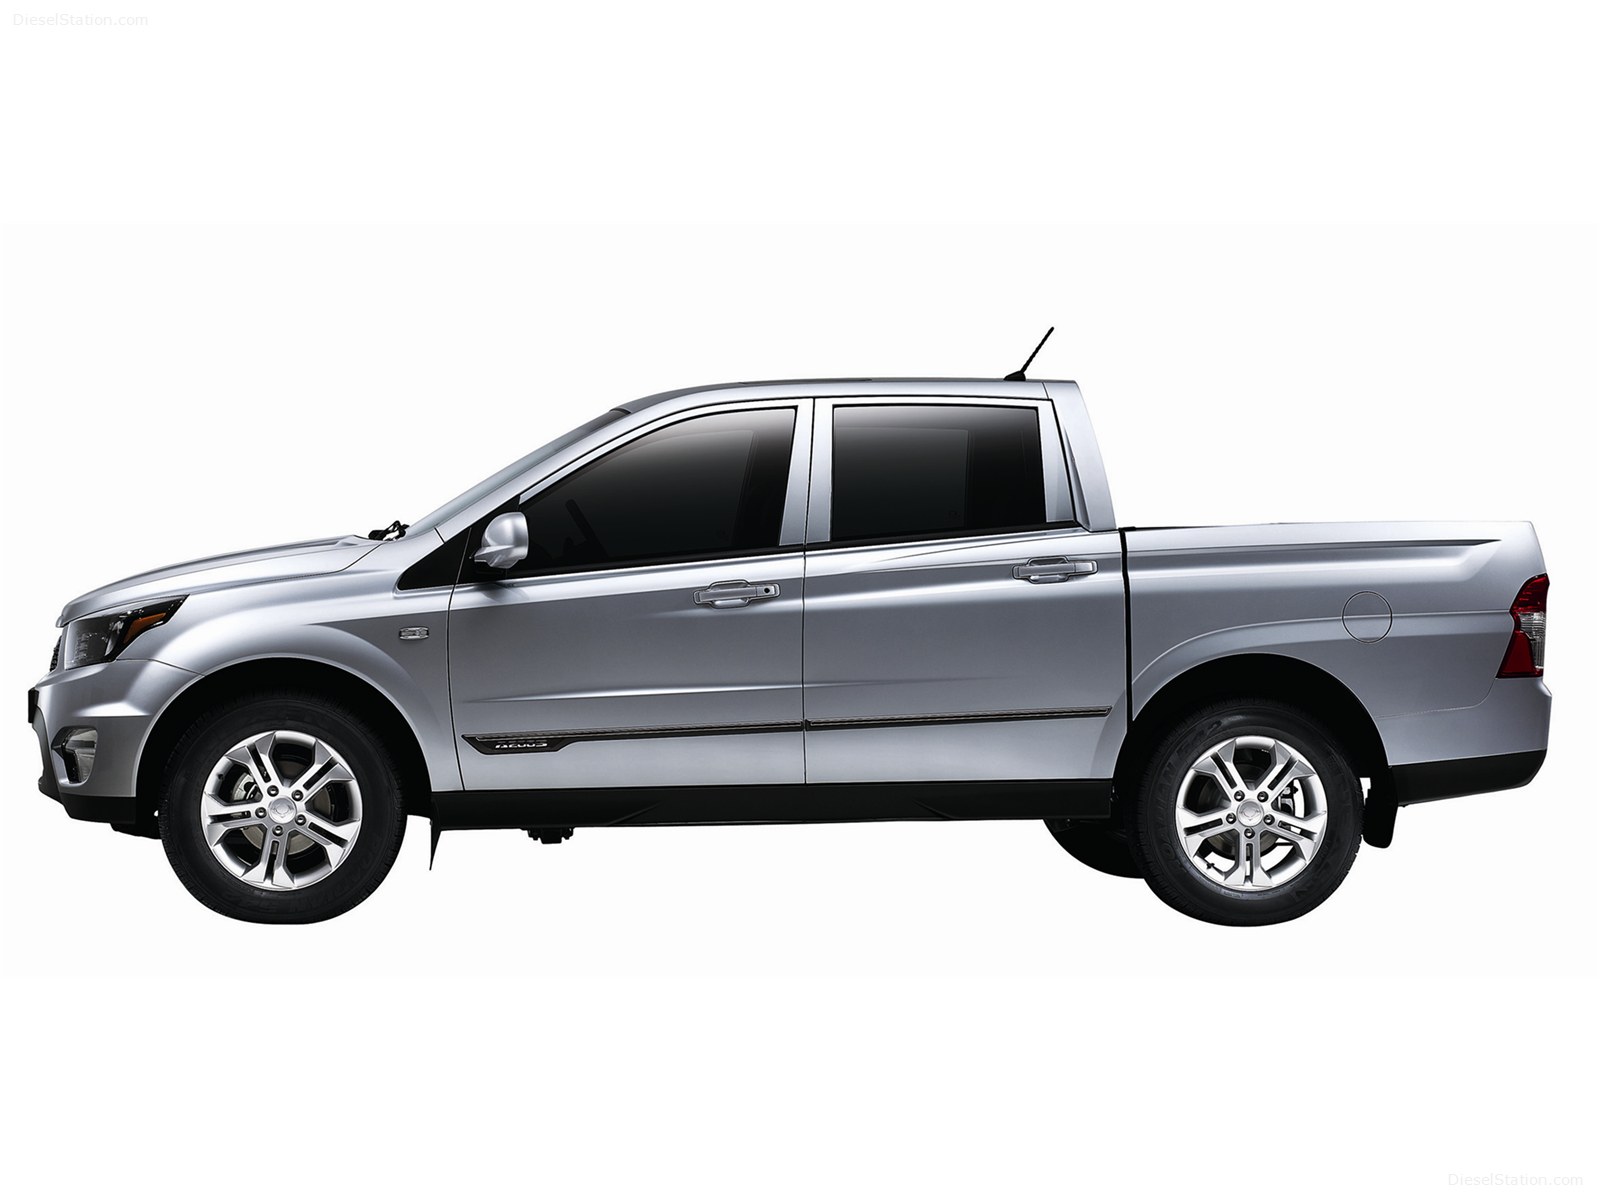 SsangYong Actyon Sports.jpg